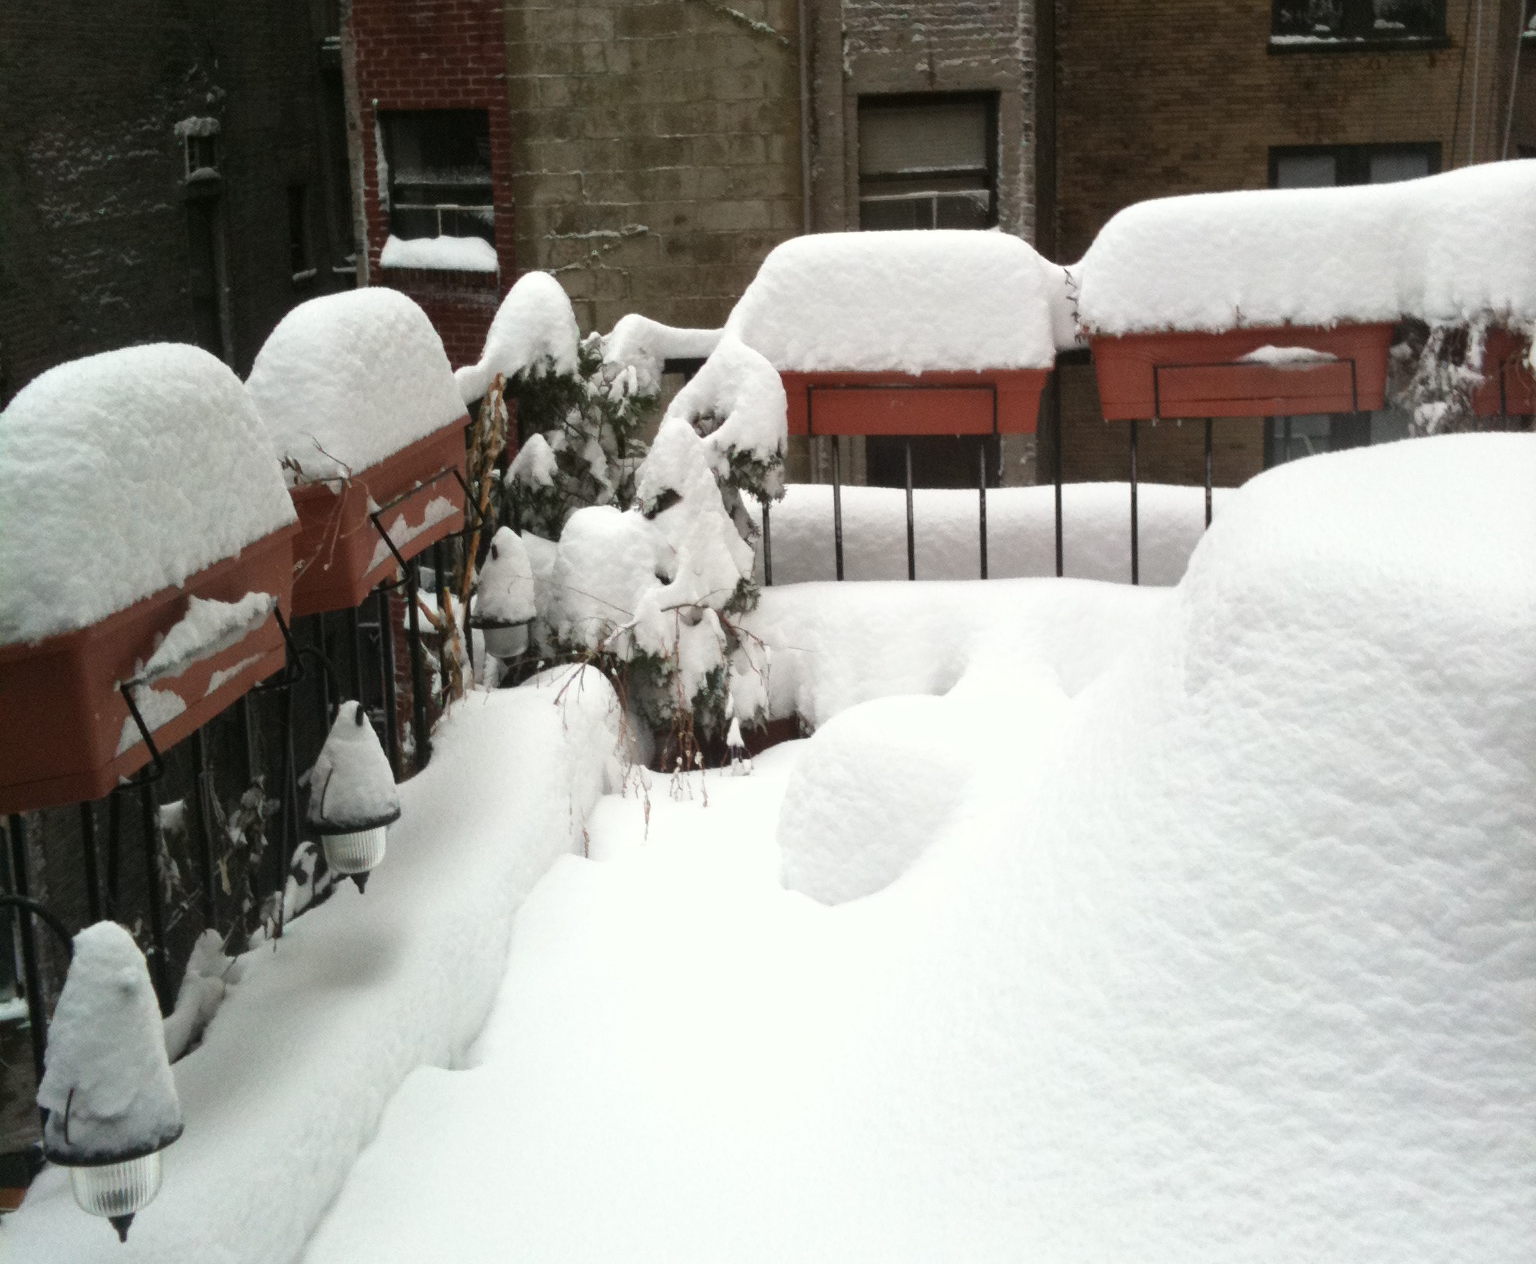 It's a snow day in NYC at 258 W 93rd Street.